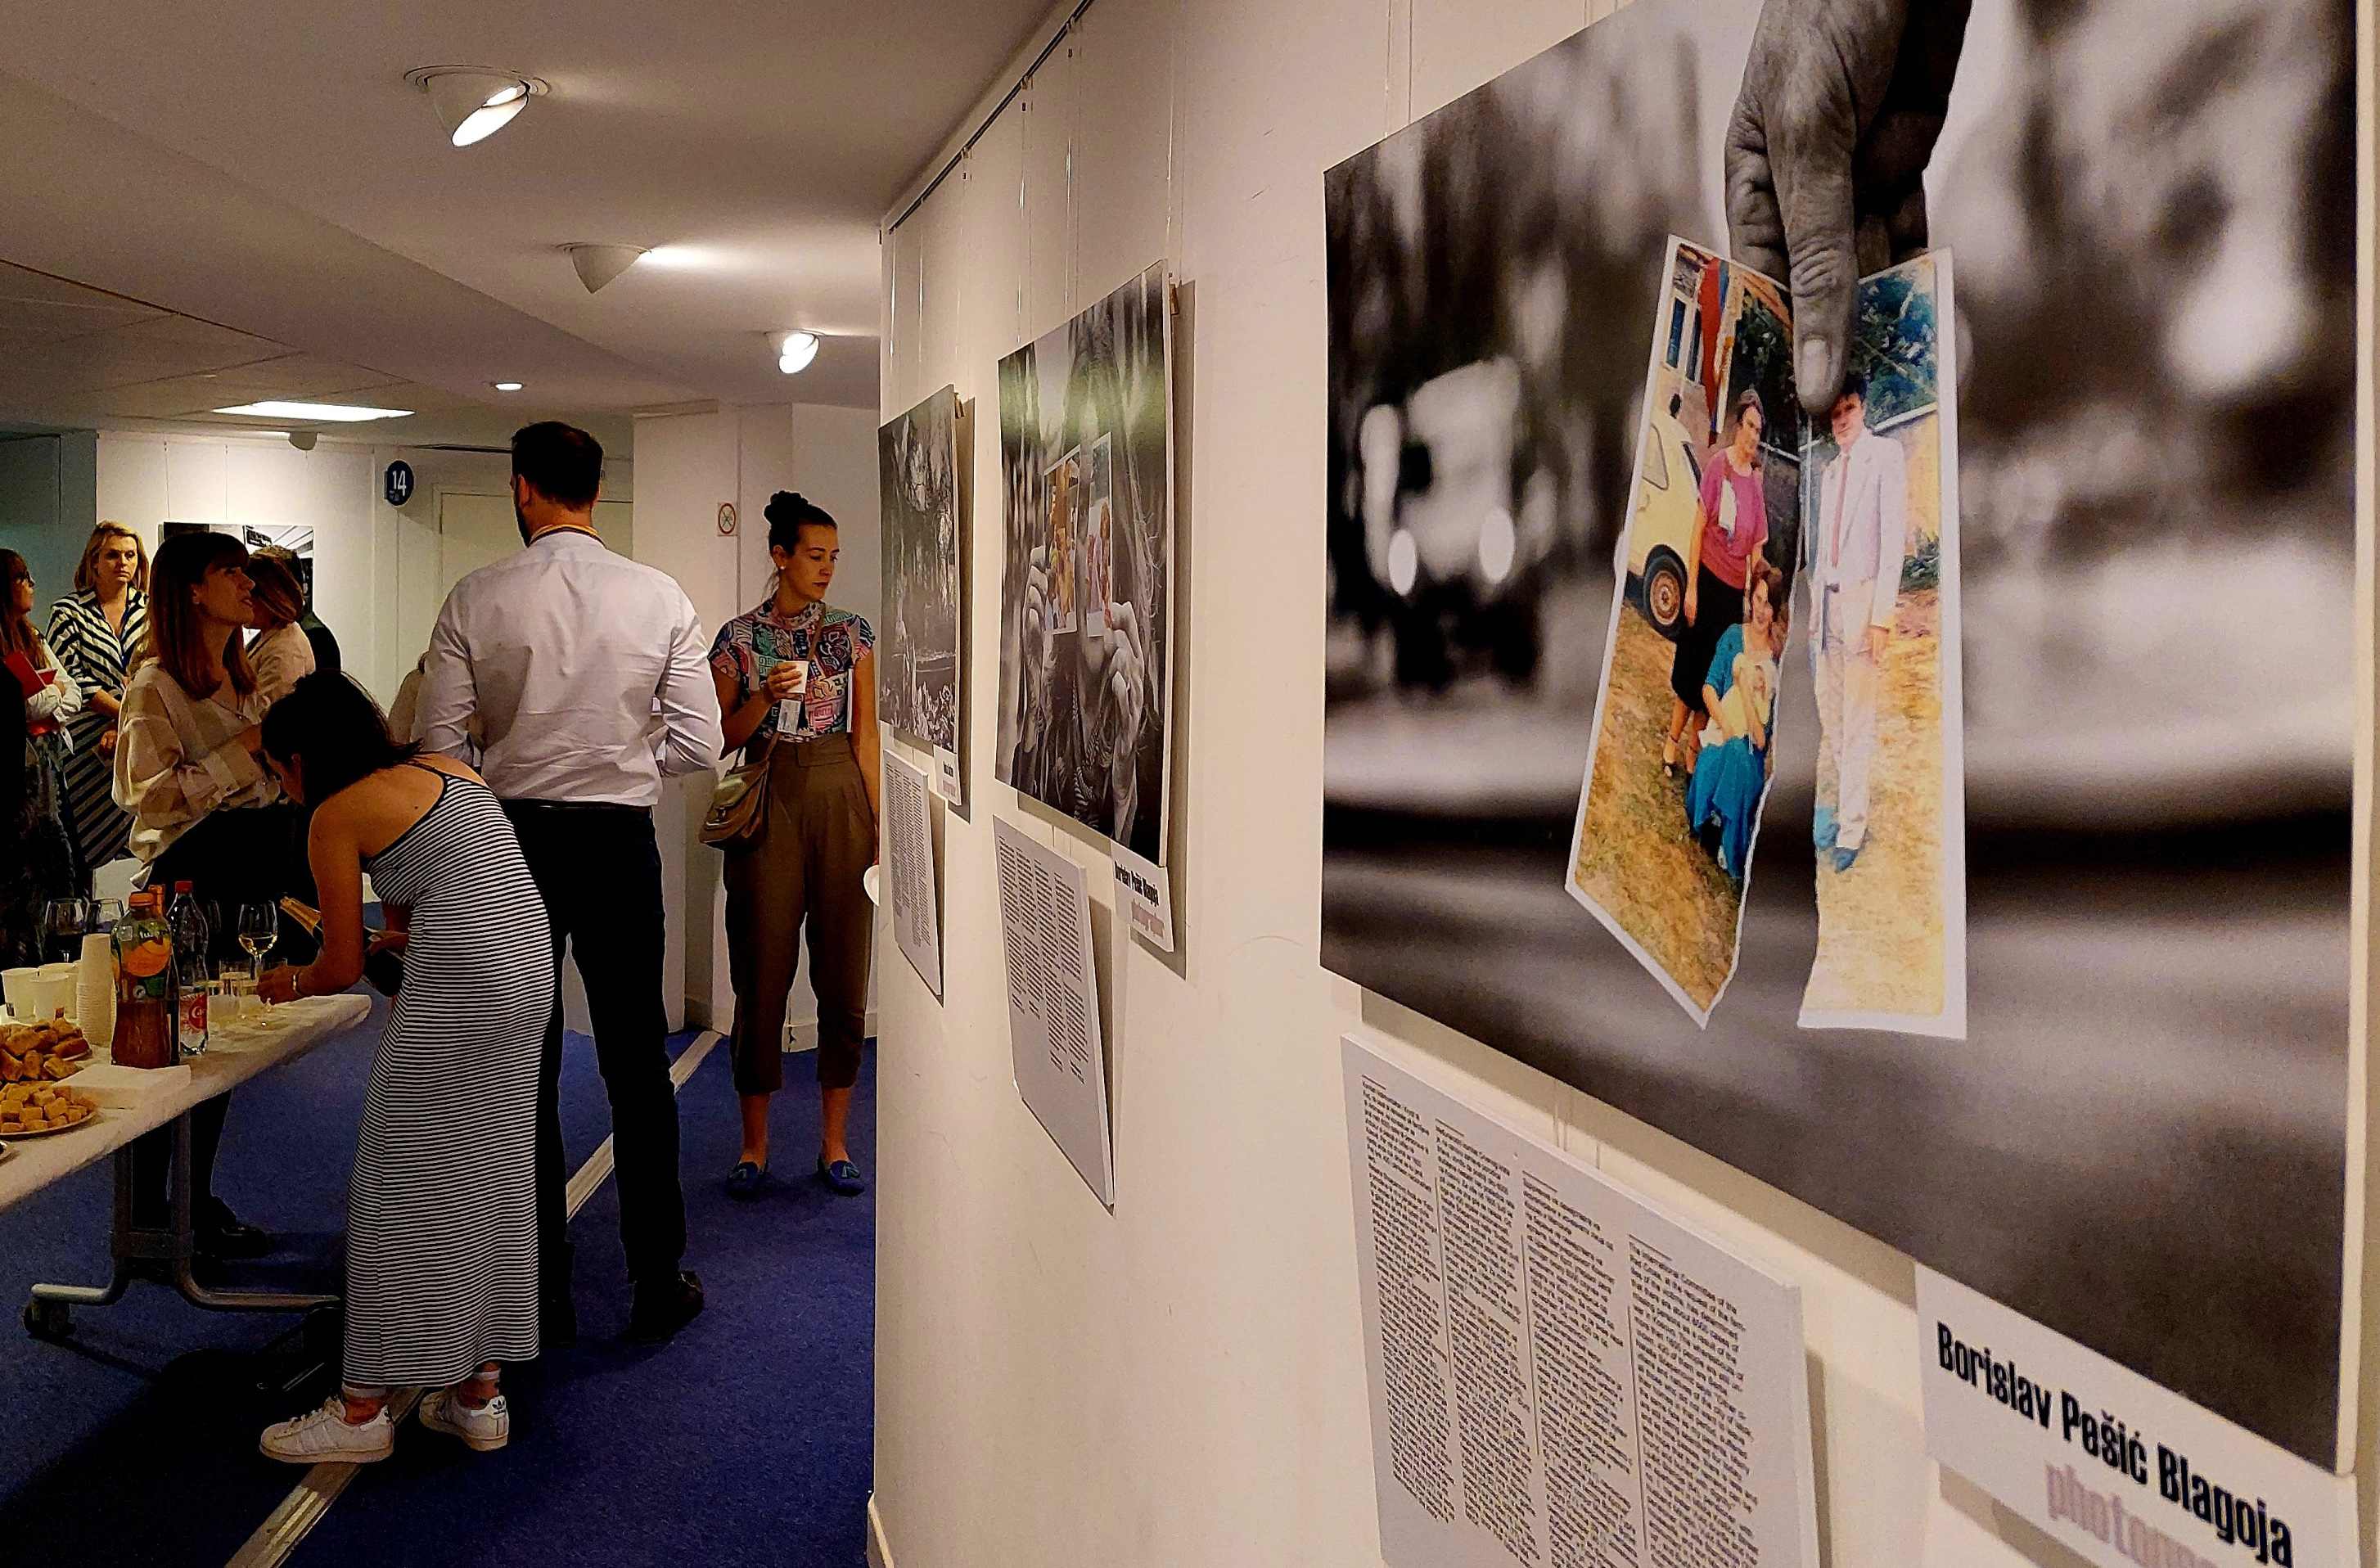 Audience members look at photographs displayed on the wall.